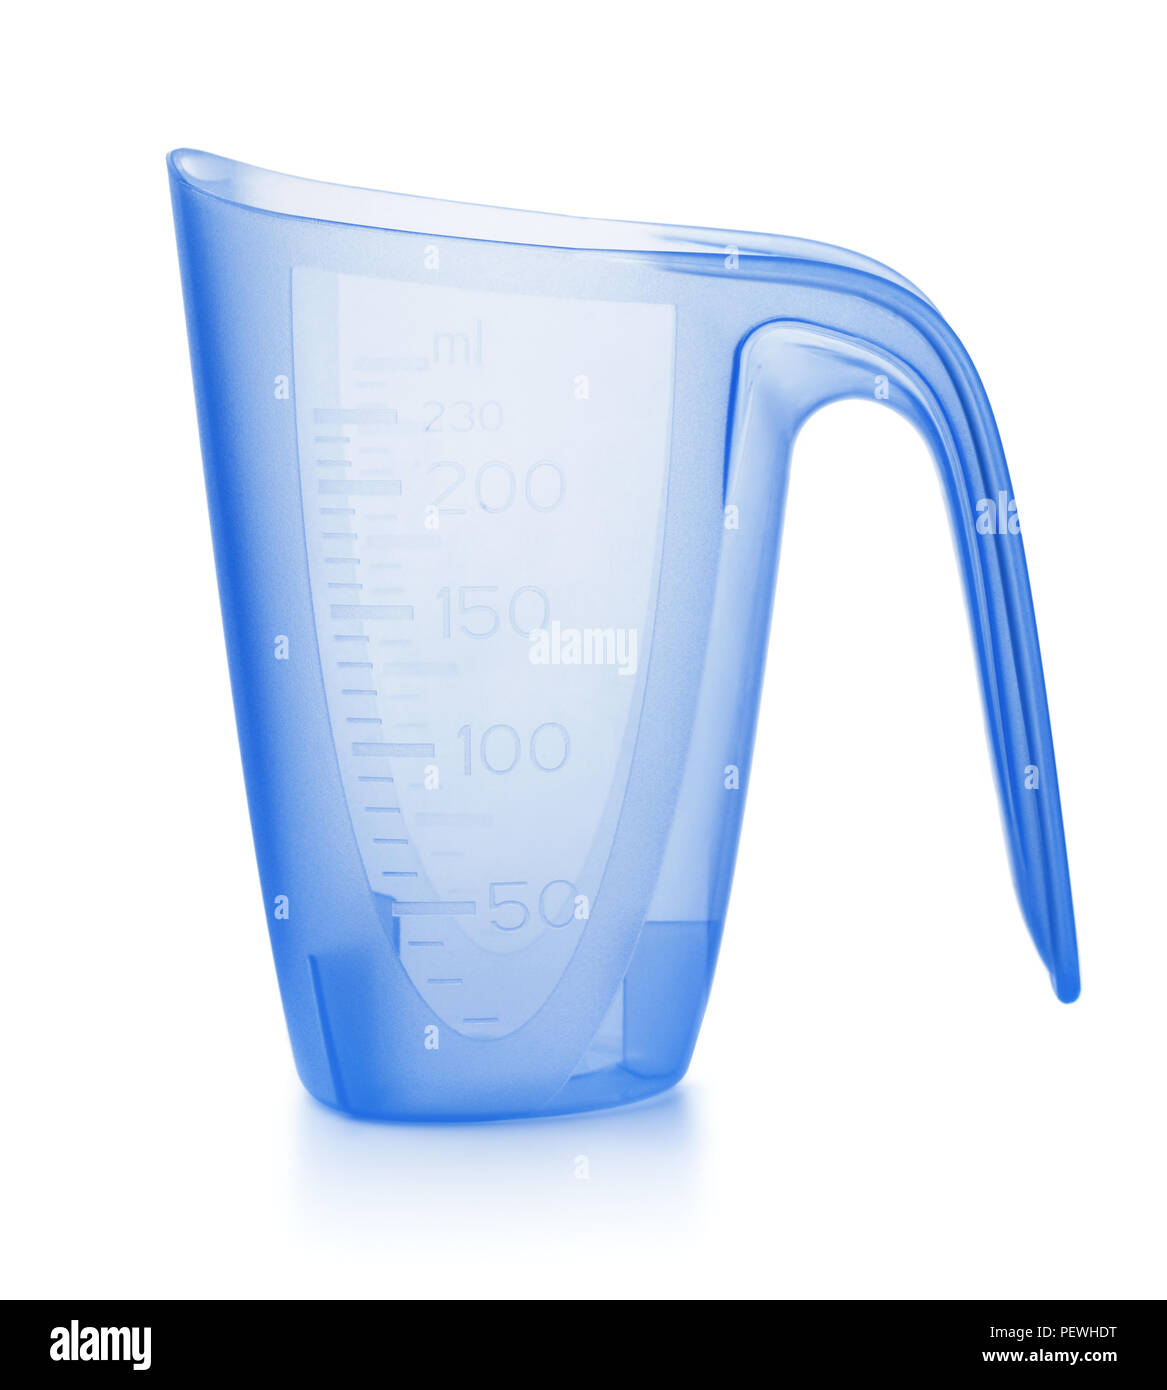 https://c8.alamy.com/comp/PEWHDT/blue-plastic-washing-powder-measuring-cup-isolated-on-white-PEWHDT.jpg